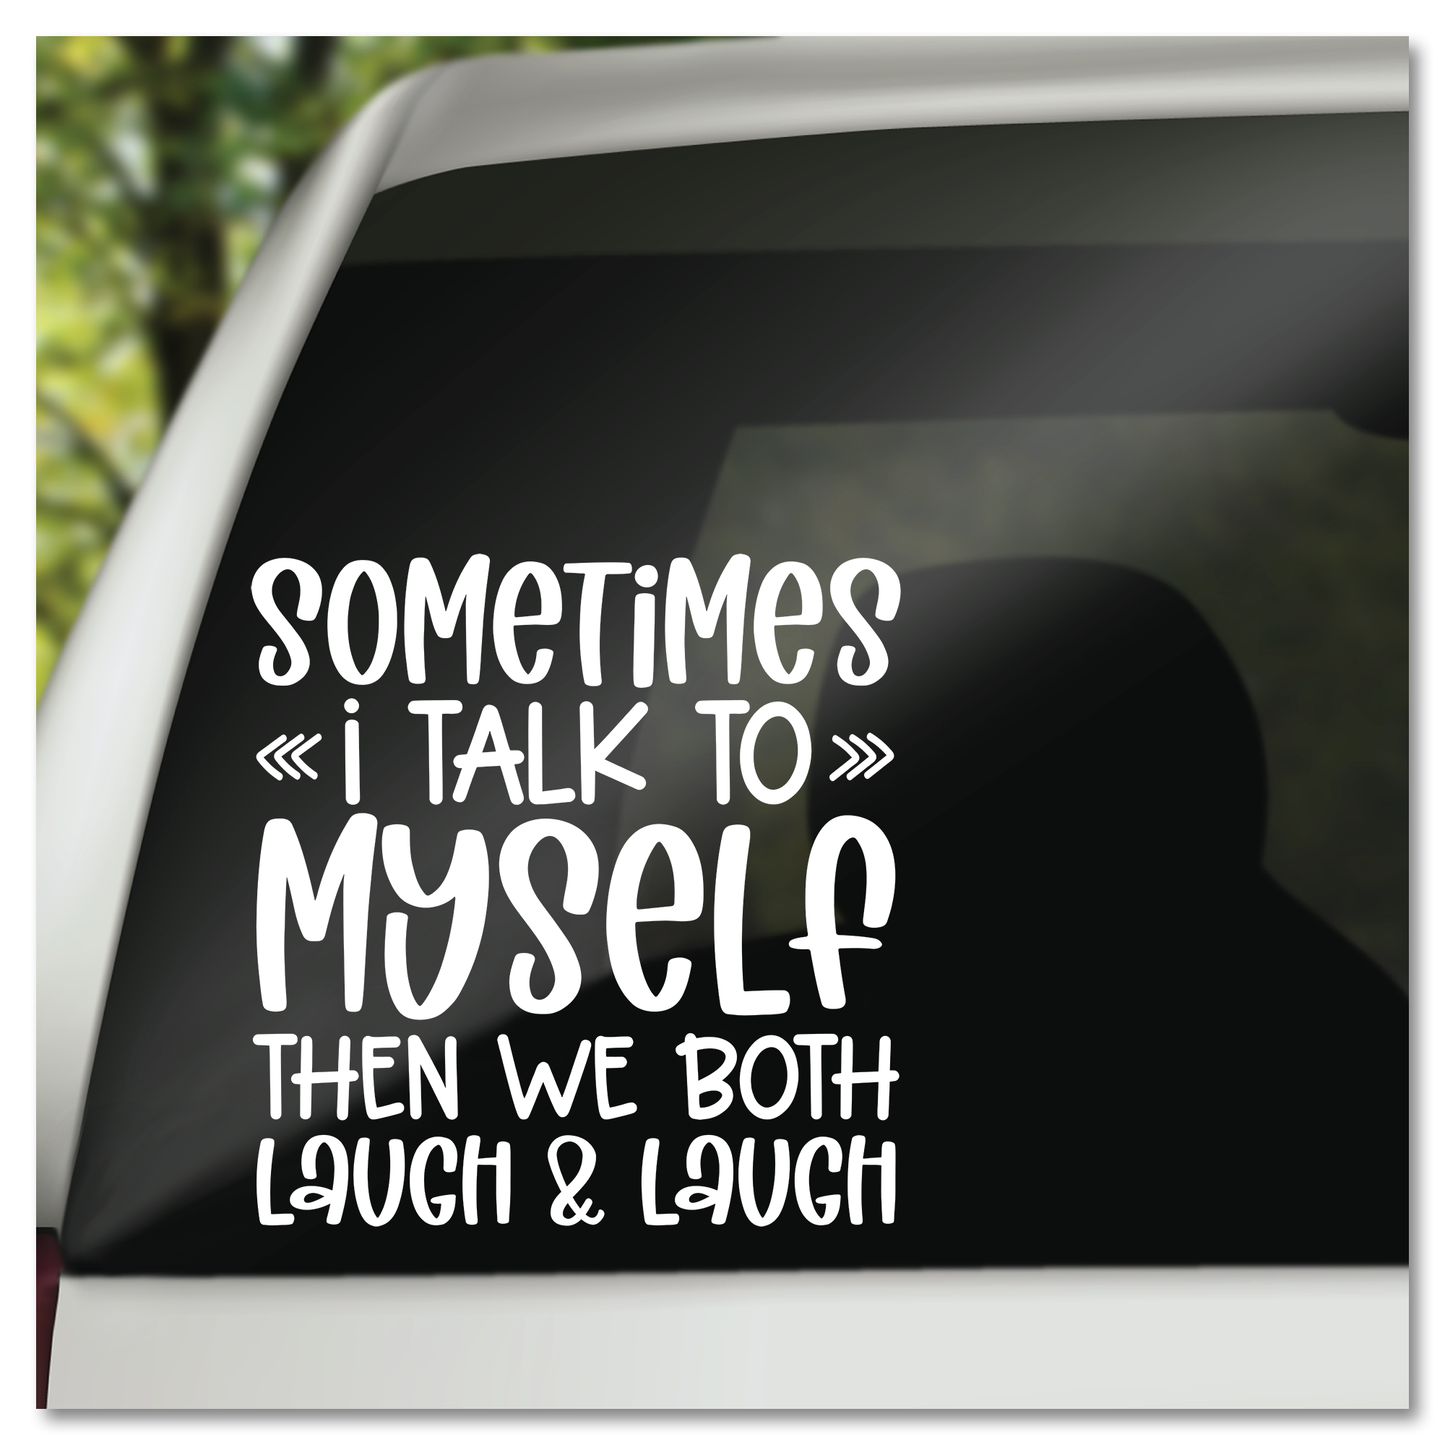 Sometimes I Talk To Myself Then We Both Laugh & Laugh Vinyl Decal Sticker